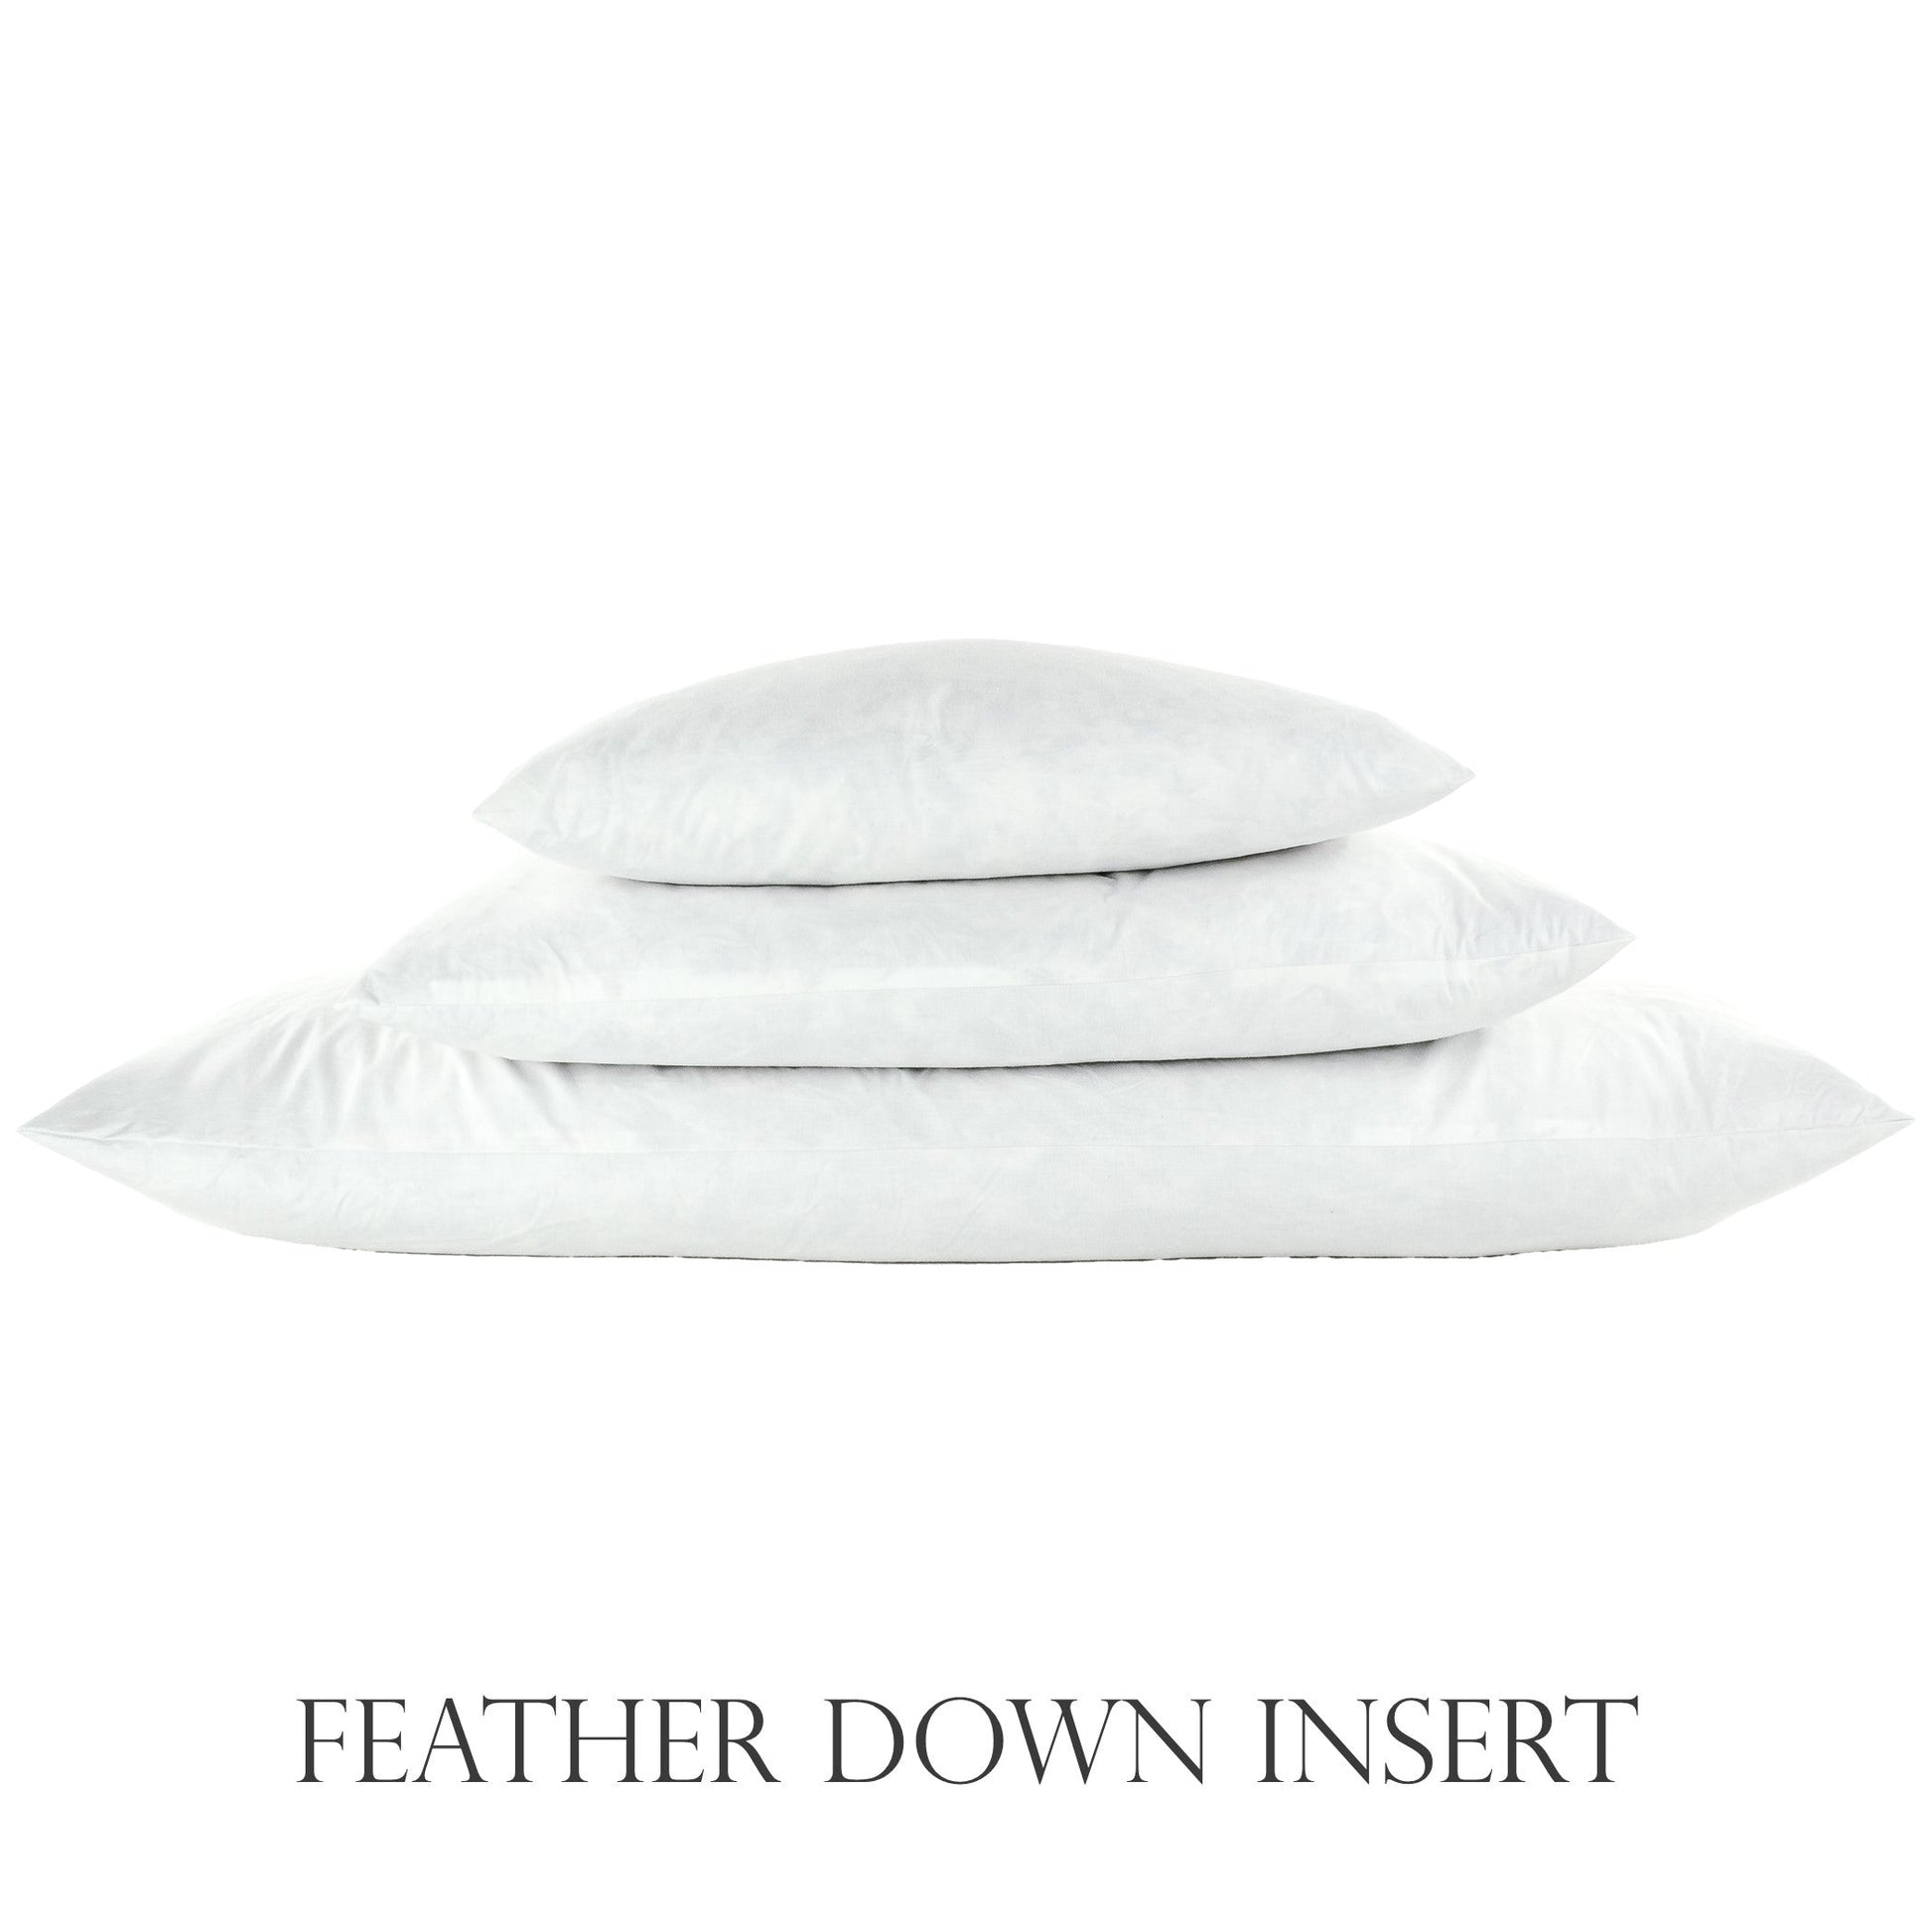 Luxury hypoallergenic feather/down pillow inserts